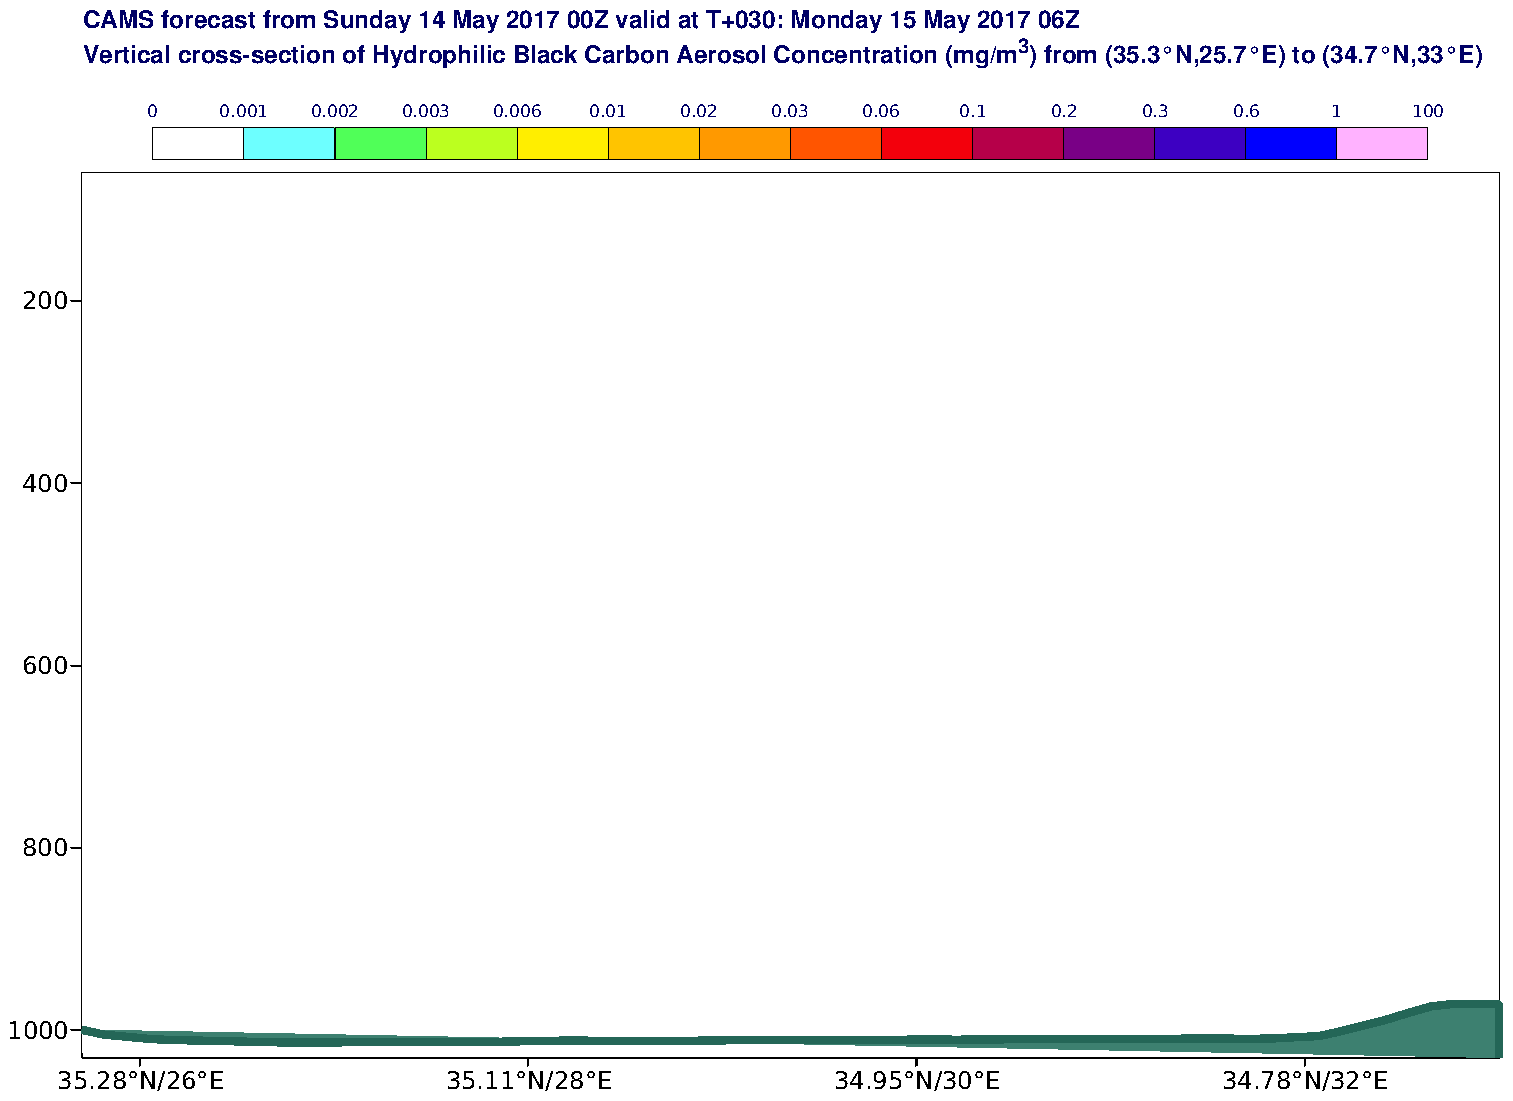 Vertical cross-section of Hydrophilic Black Carbon Aerosol Concentration (mg/m3) valid at T30 - 2017-05-15 06:00